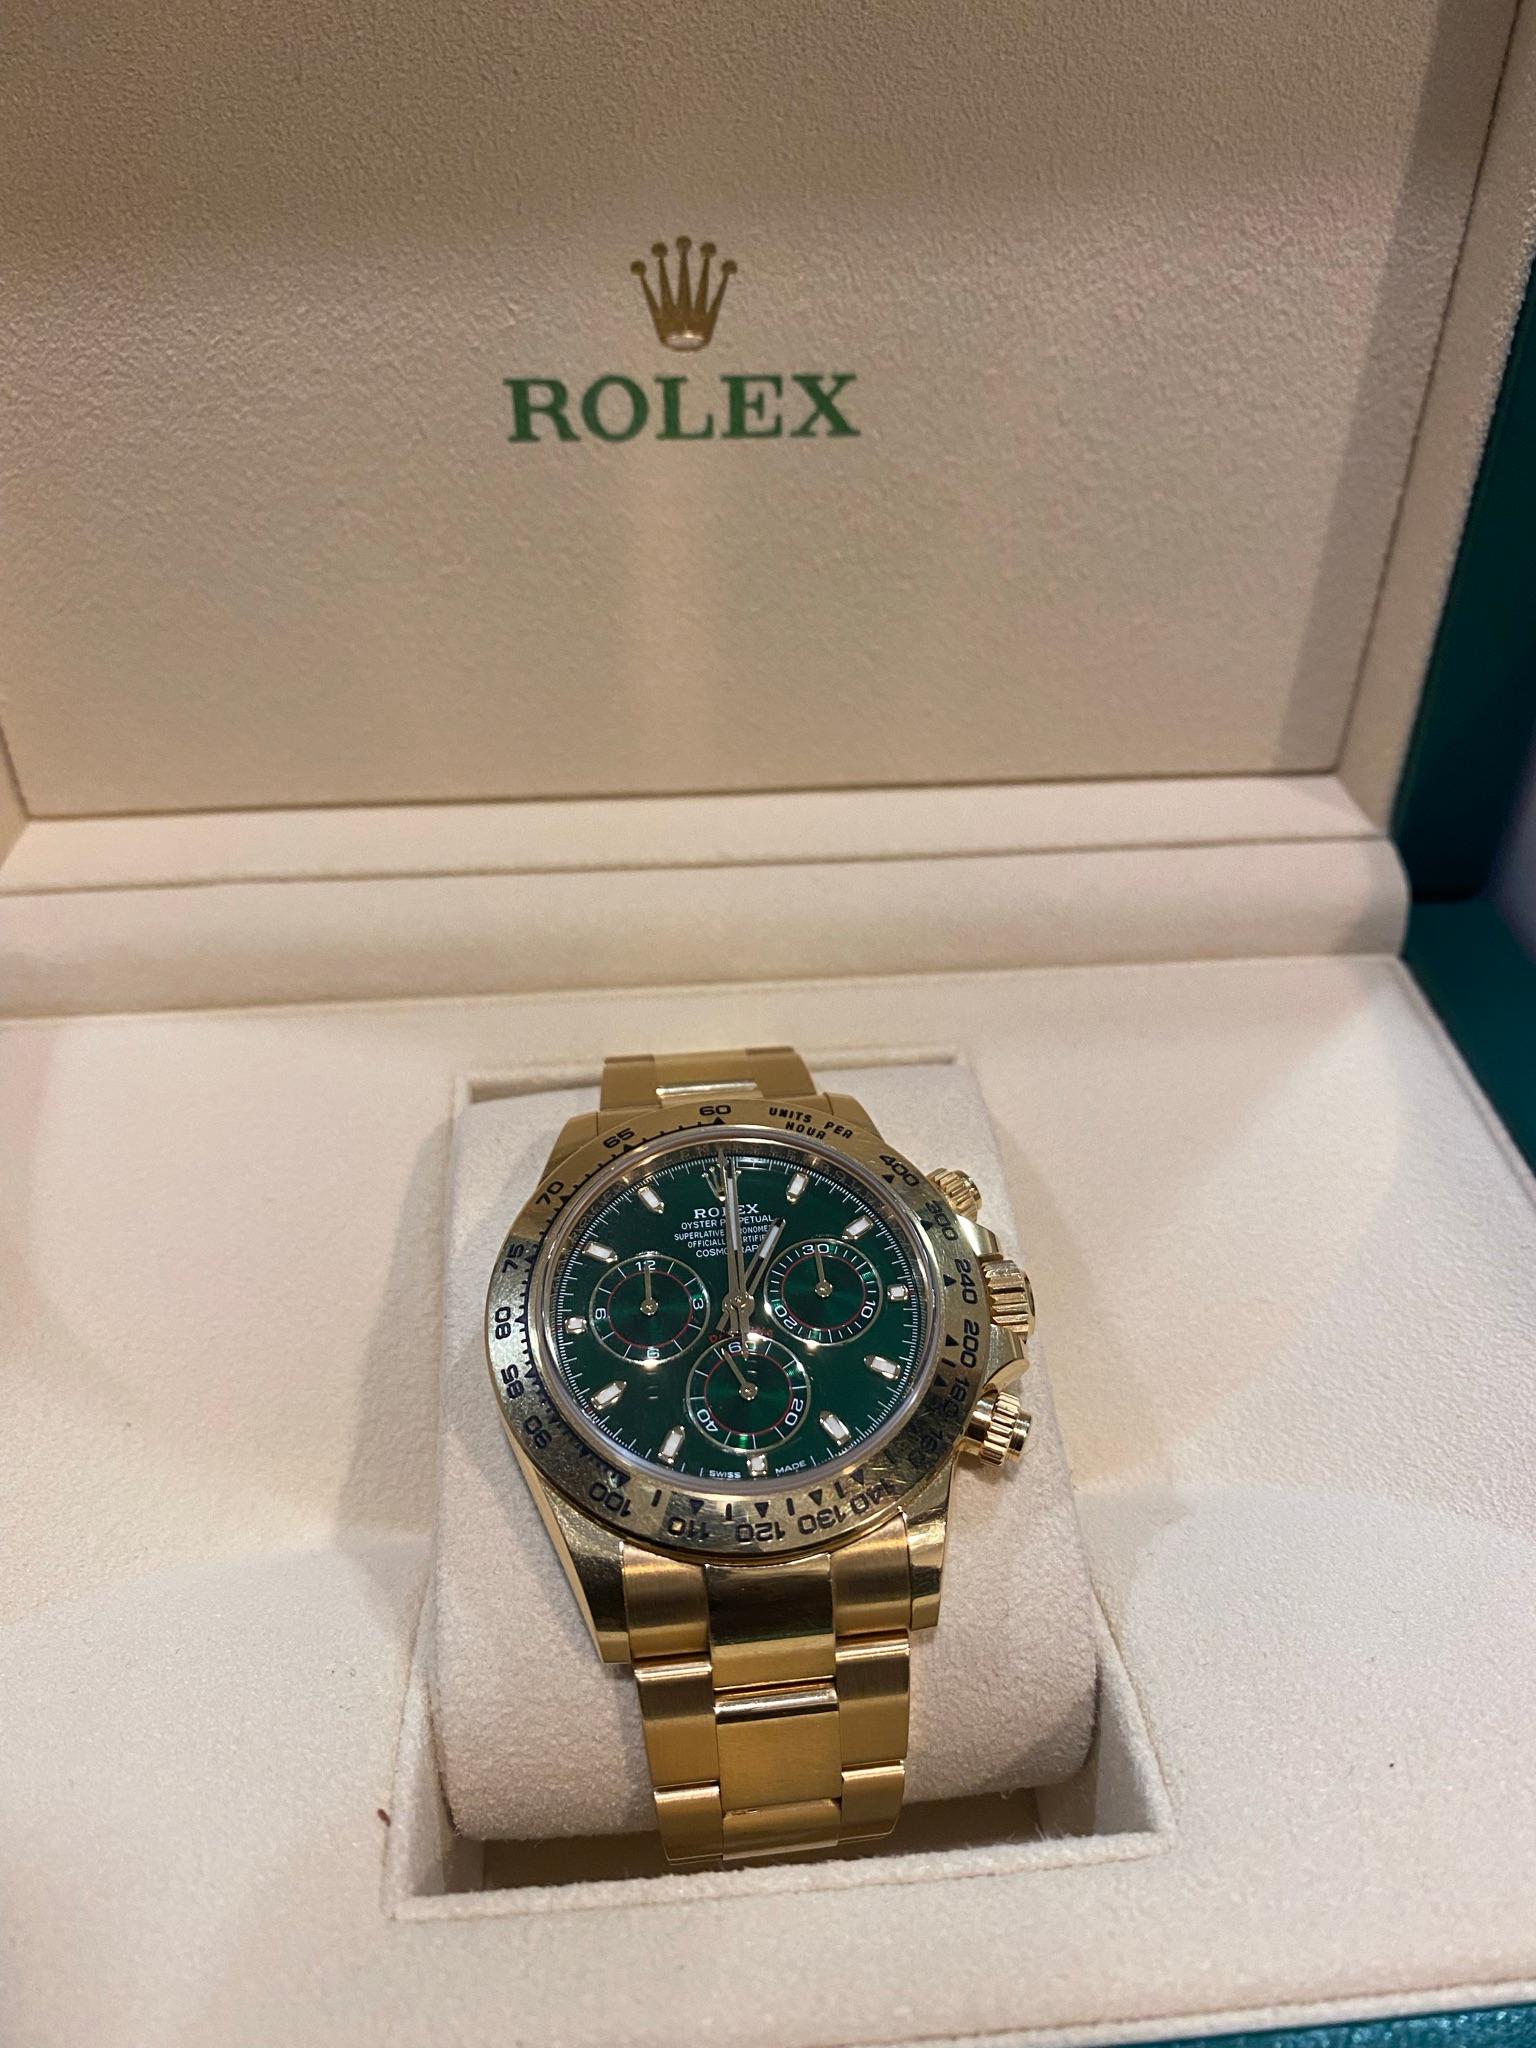 Rolex Cosmograph Daytona Oyster 116508 40MM, Yellow Gold, Green Dial

Rolex Cosmograph Daytona Oyster, 40 MM, YELLOW GOLD The Cosmograph Daytona, introduced in 1963, was designed to meet the demands of professional racing drivers. An icon eternally